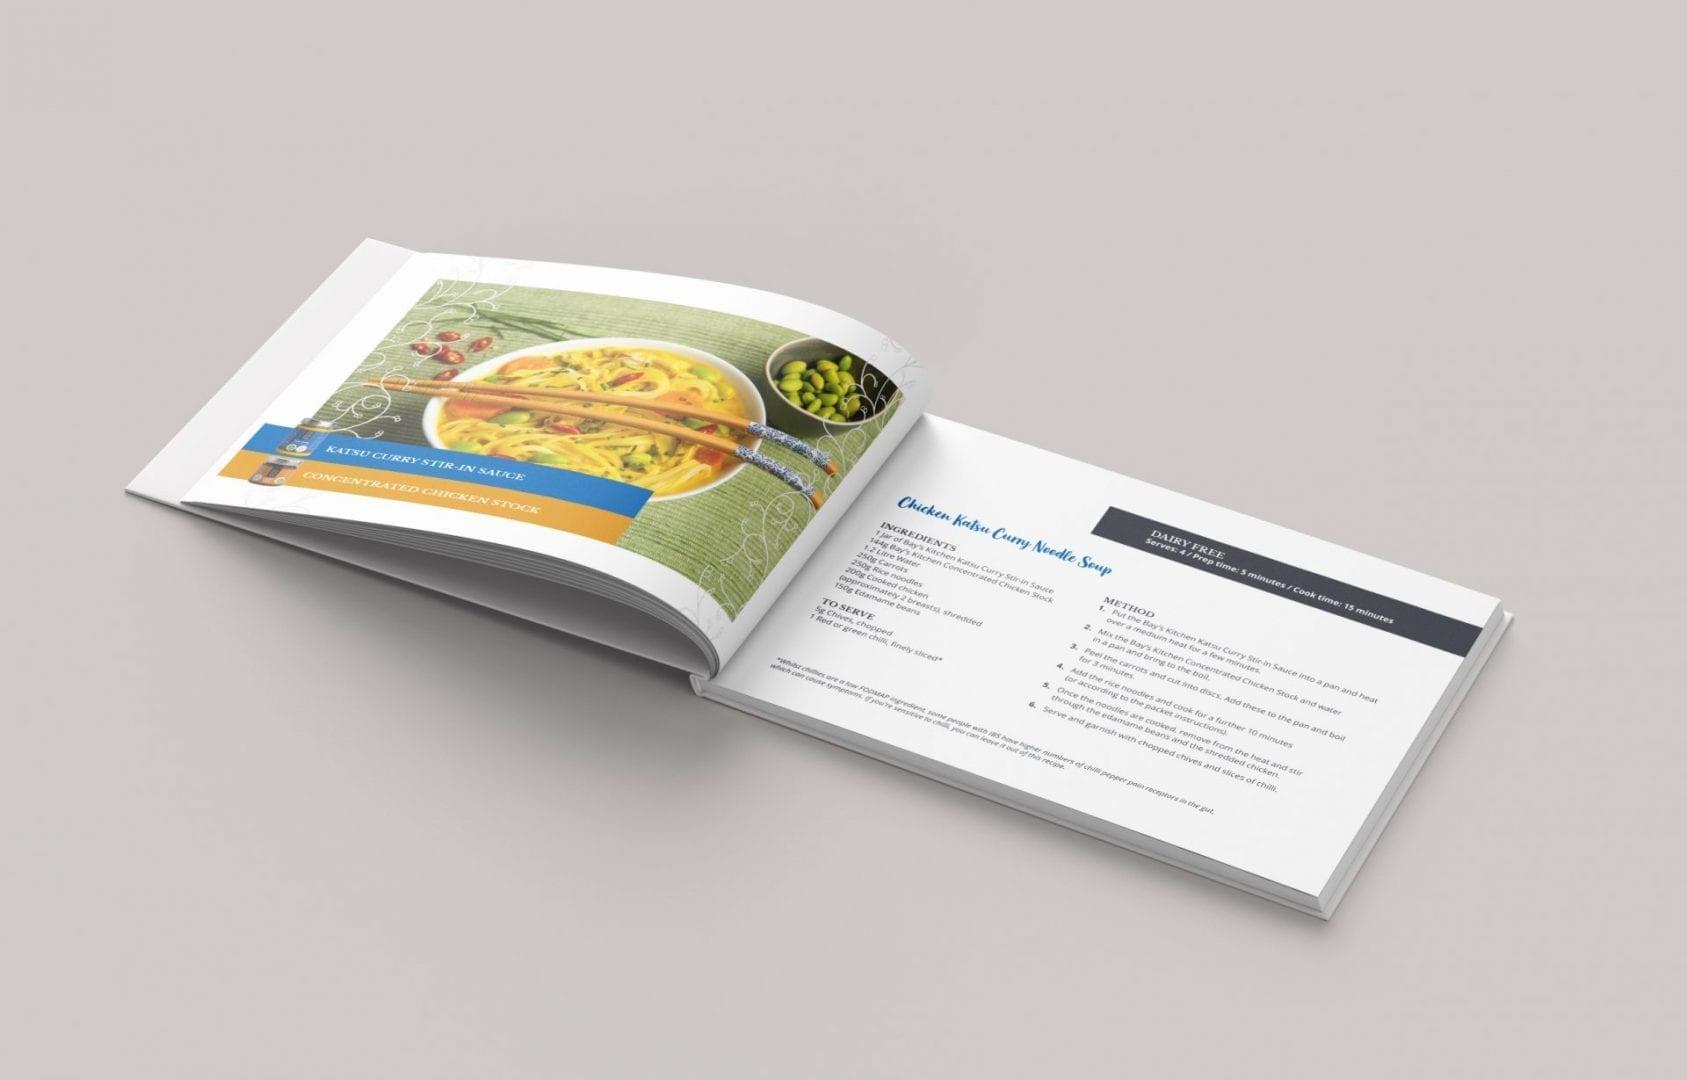 An inside view of the Bay's Kitchen Low FODMAP and gluten free recipe book